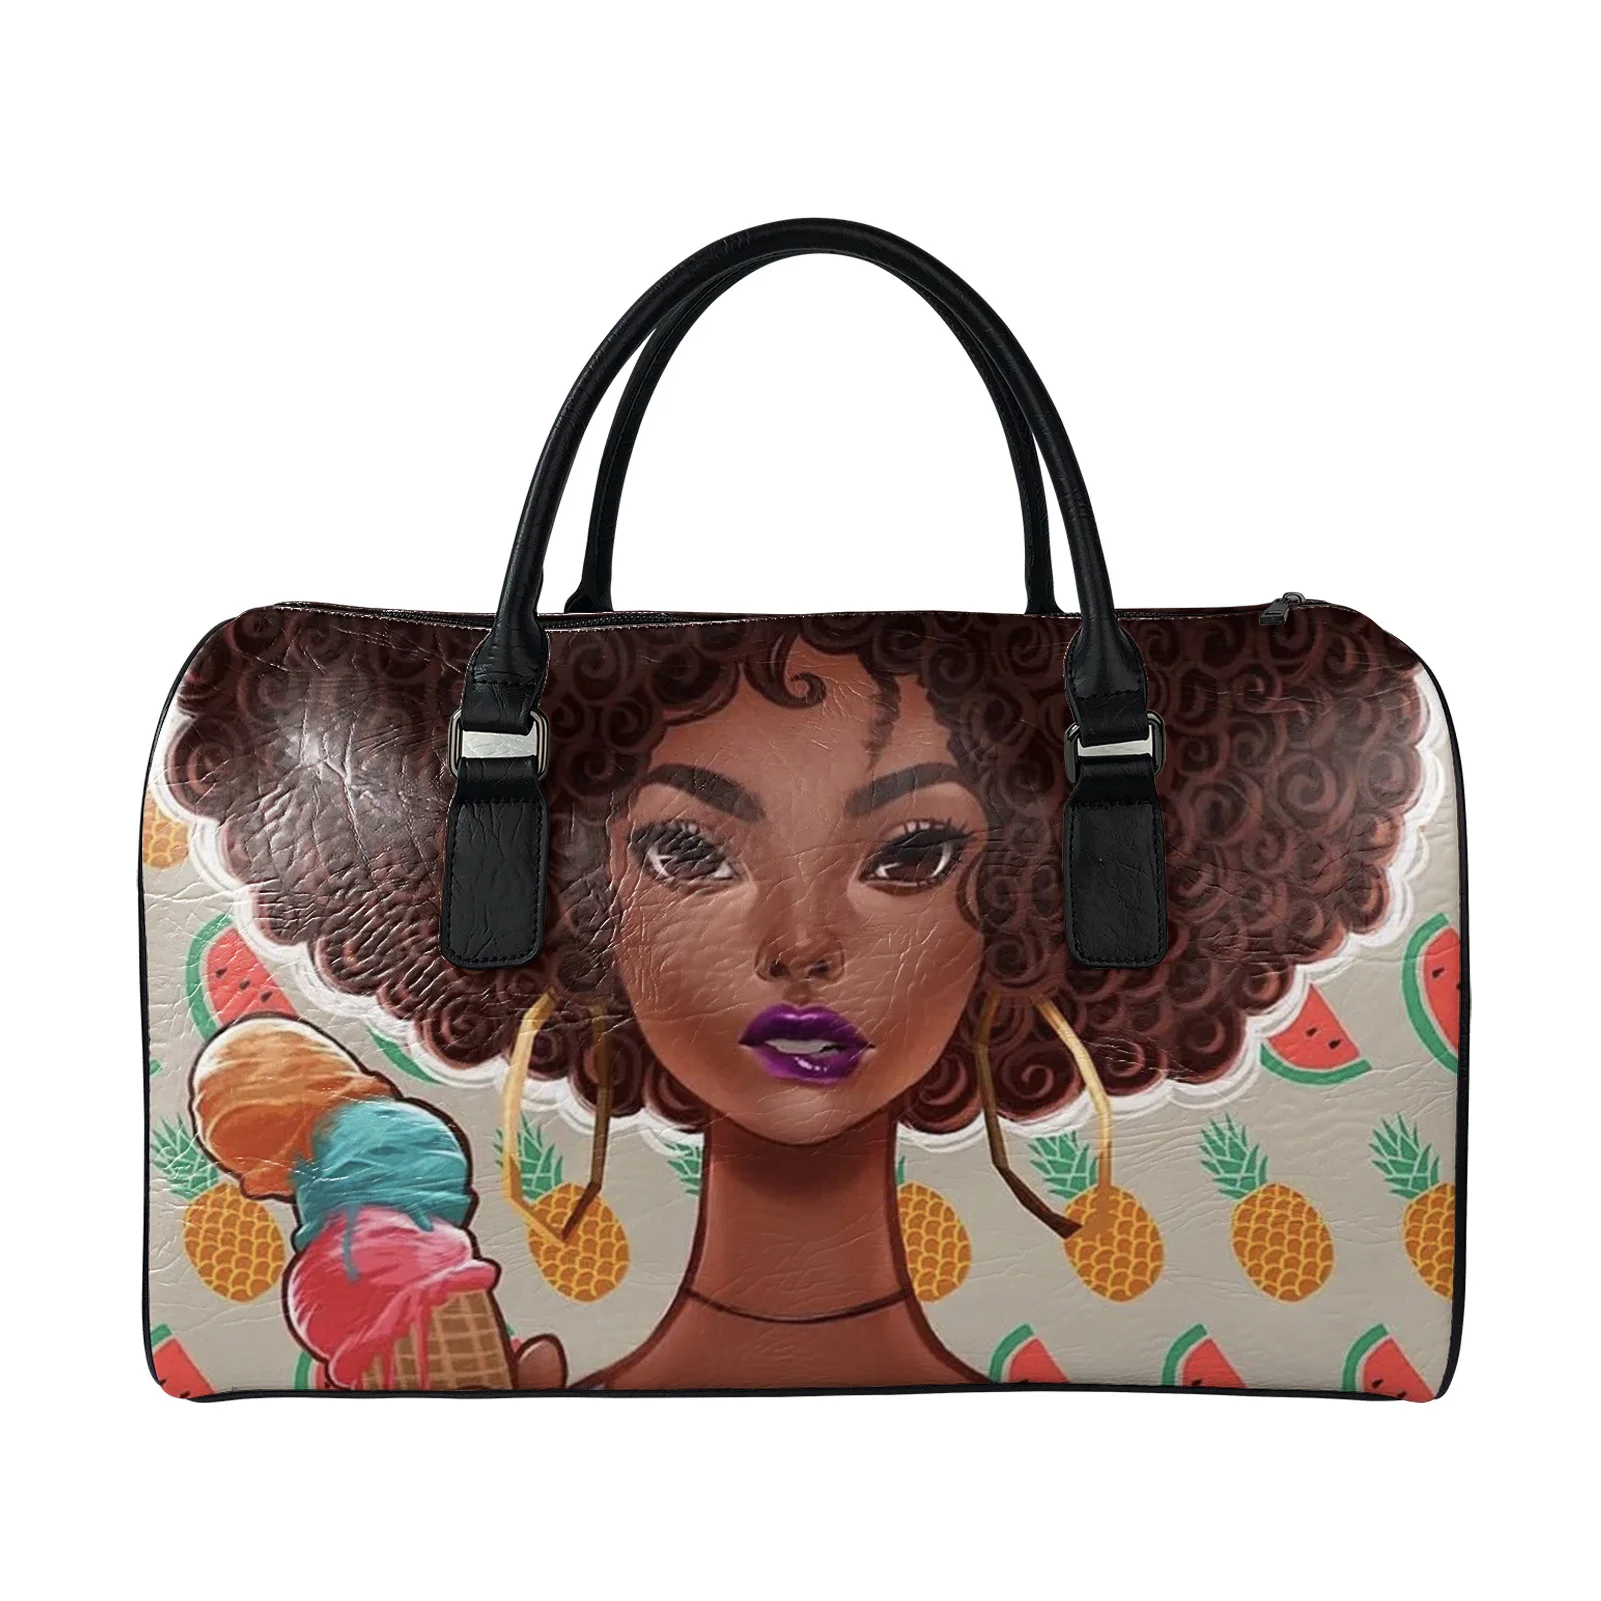 

African American Black Girl with Afro Big Duffle Travel Bag Gym Luggage Bags Lightweight Waterproof Carry On Tote Bag, Customized color